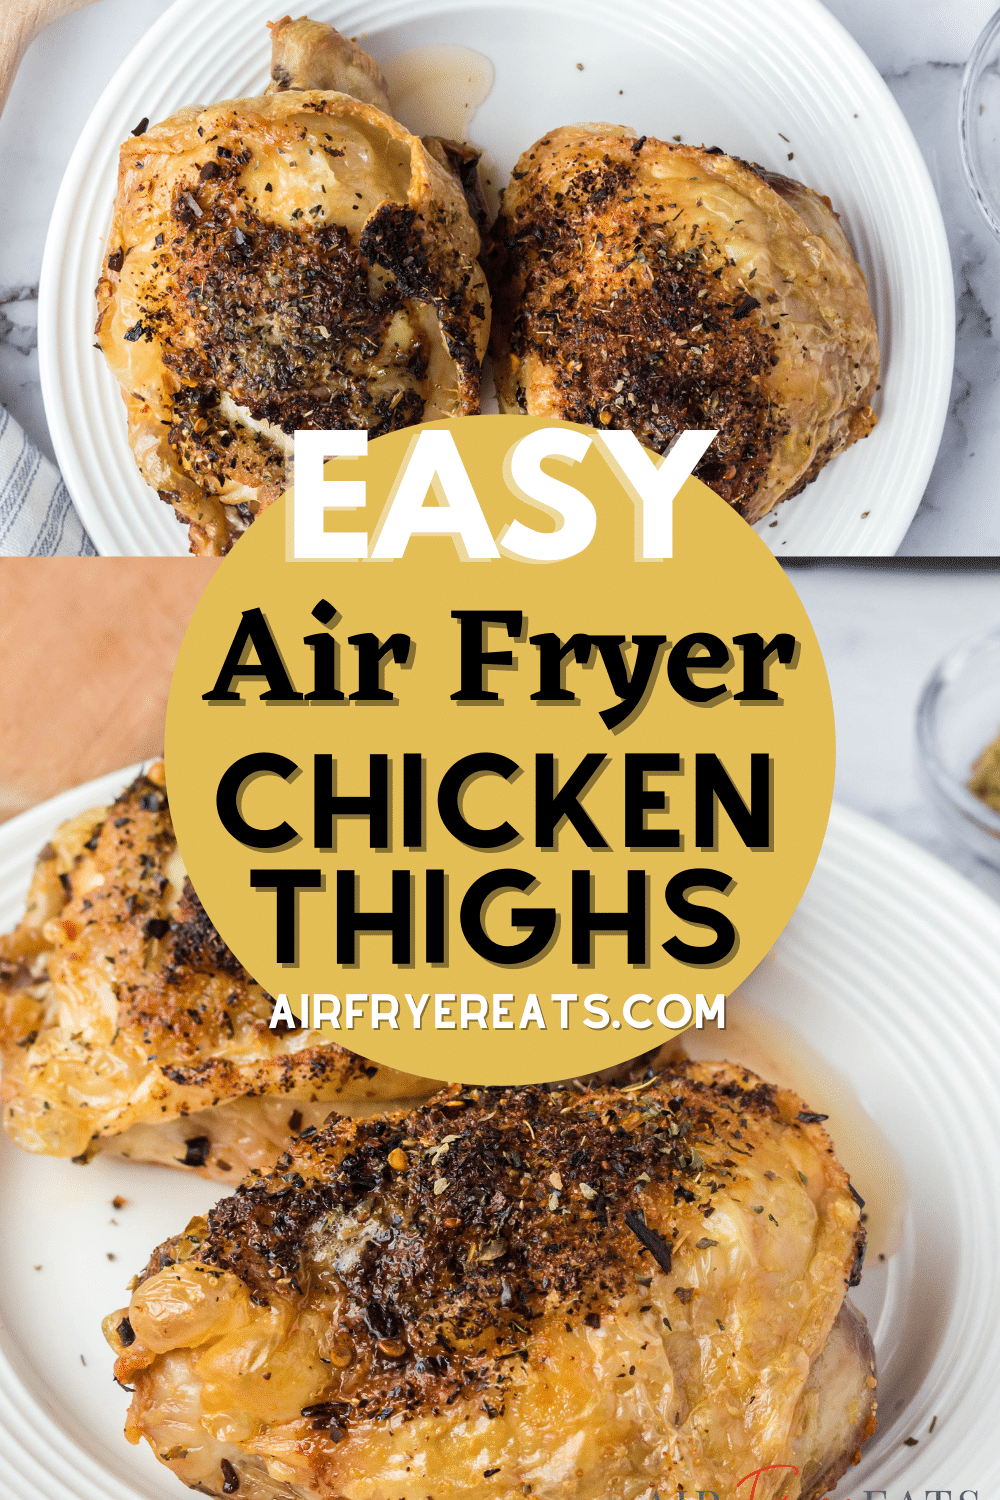 It's easy to make Chicken thighs in the Ninja Foodi! Ninja Foodi Chicken Thighs are air fried in the foodi to make them tender and juicy with perfectly crispy skin. #ninjafoodi #ChickenThighs via @vegetarianmamma